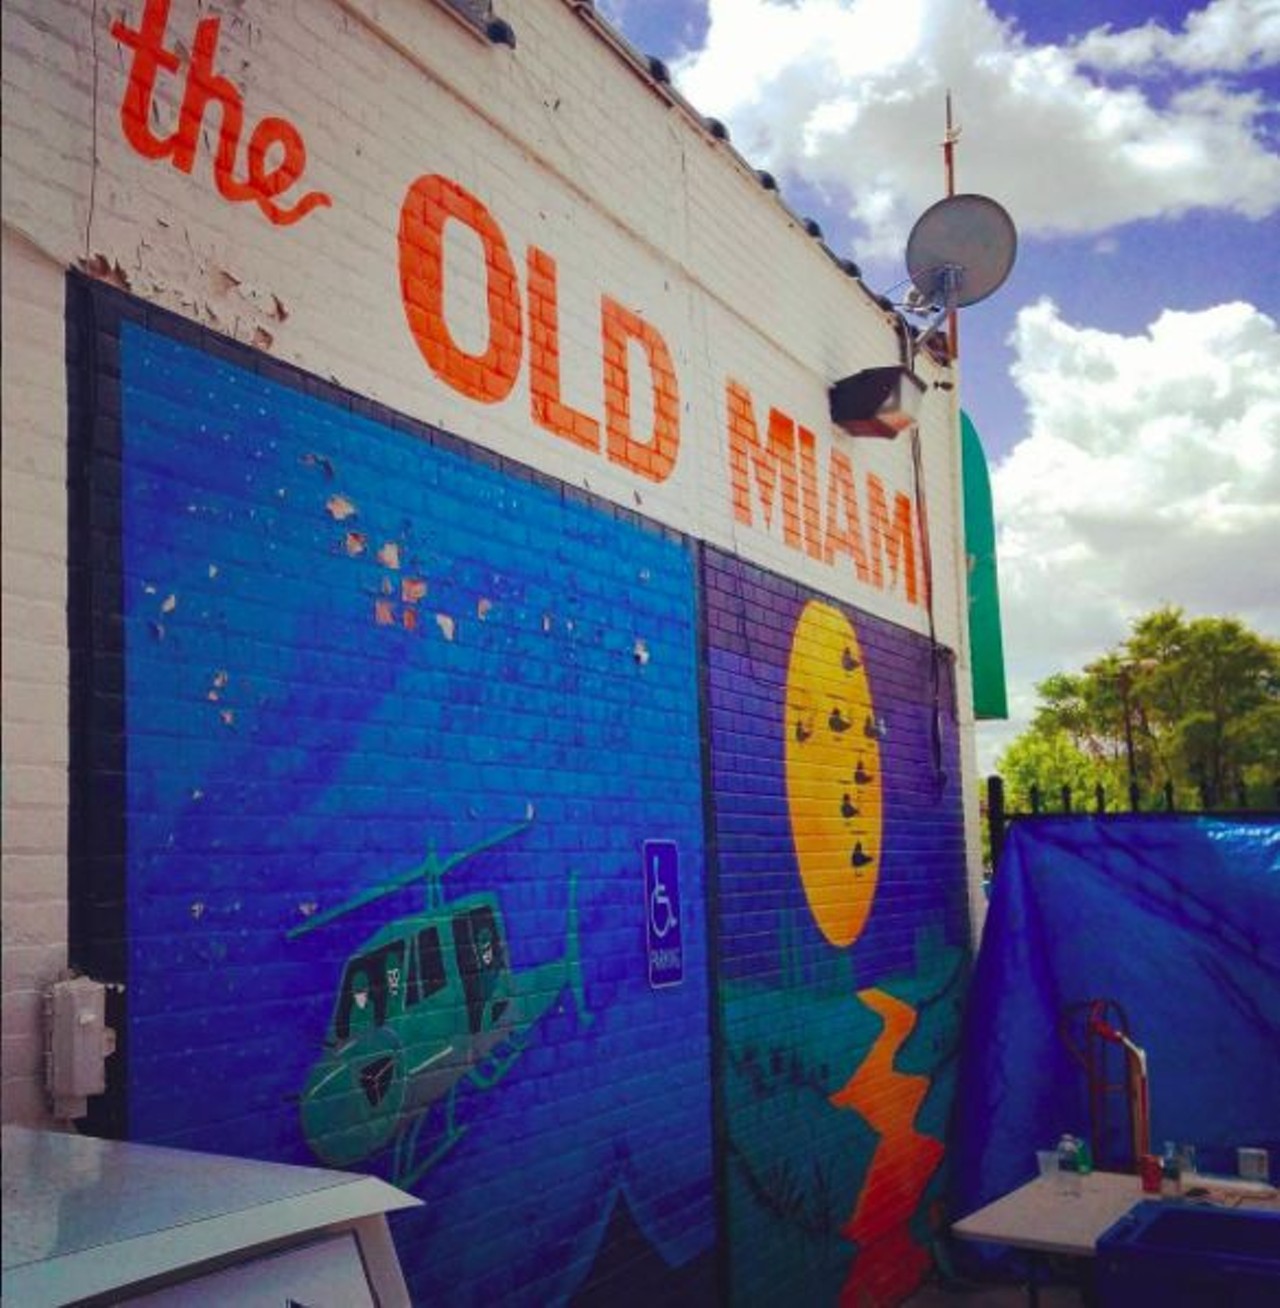 Old Miami
3930 Cass Ave., Detroit 
Located in Midtown, this dive bar is a great place to start your day drinking. Check out the Veteran memorabilia on the walls or head outside to the garden, enjoy some BBQ and listen to some of the bands in Detroit&#146;s underground music scene. 
Photo via @jrynecki